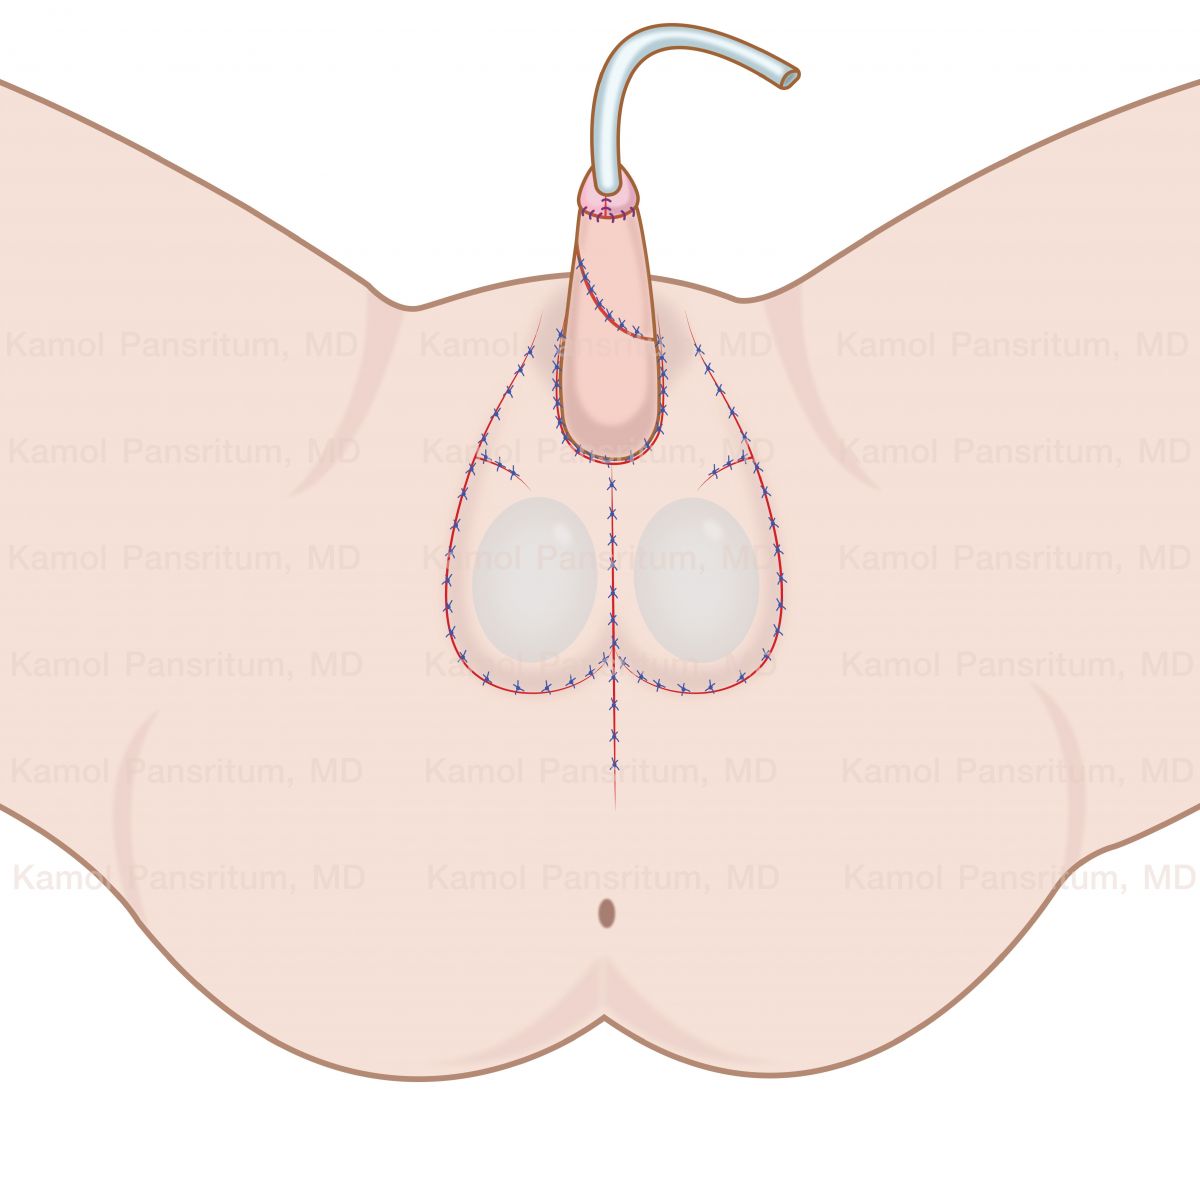 Schematic_of_full_metoidioplasty_with_ring_flap_and_testicular_implants